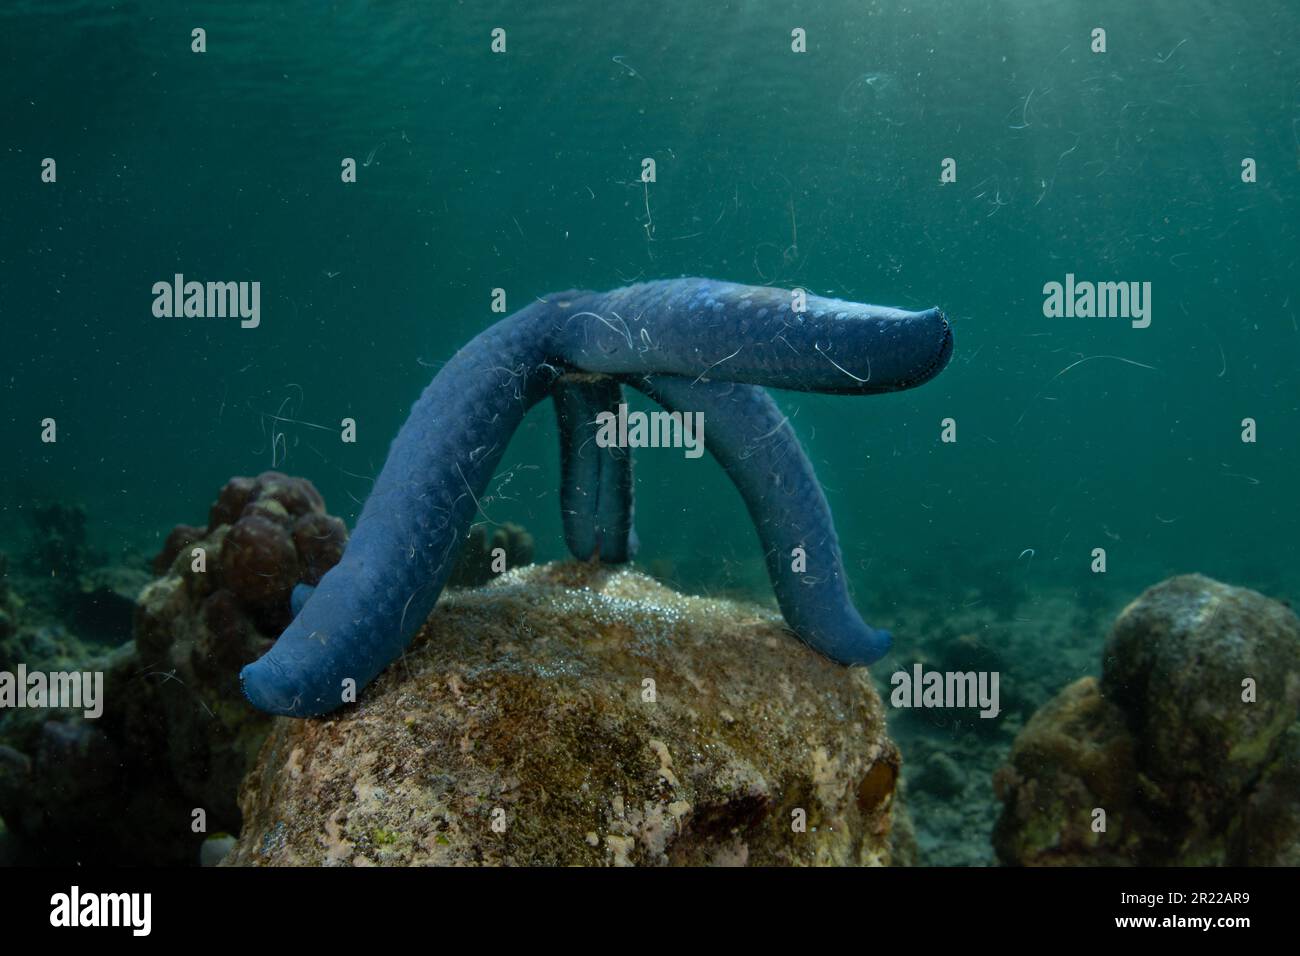 A blue sea star, Linkia laevigata, releases gametes as it spawns on a reef in Indonesia. Echinoderms release sperm and eggs into the water column. Stock Photo